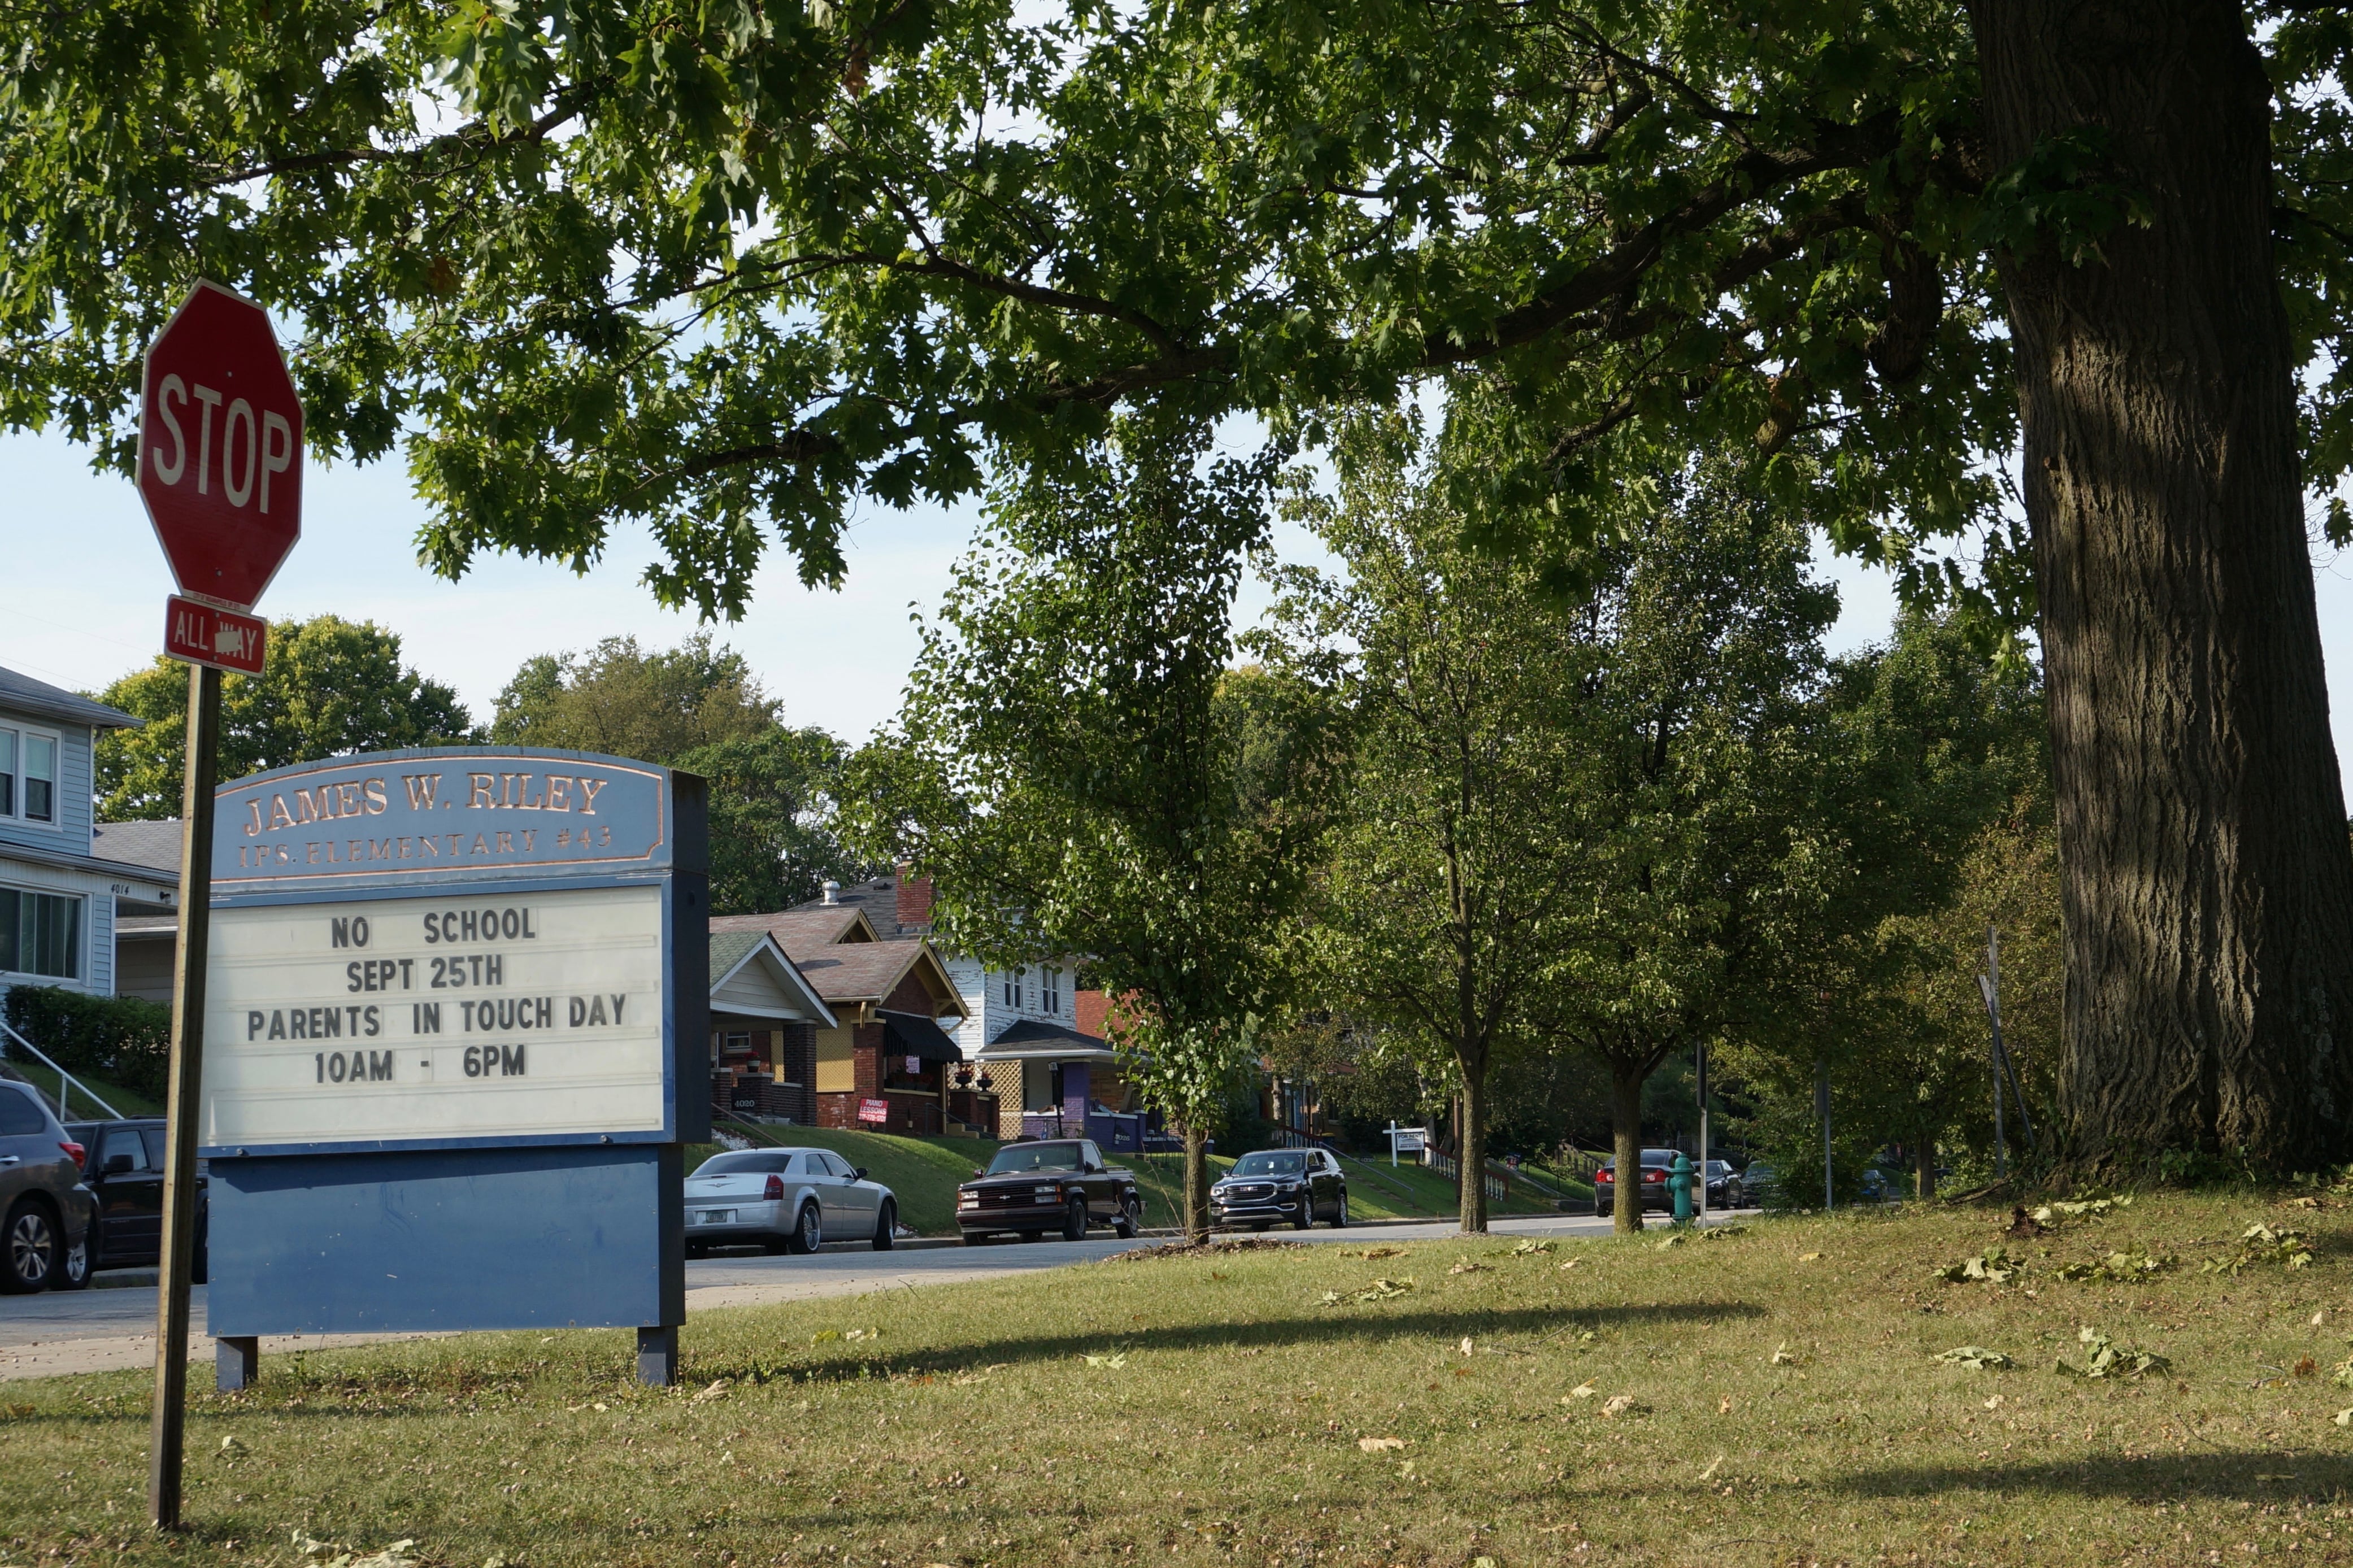 A blue school sign reading “James W. Riley” sits on a grassy lawn with a red stop sign in the foreground.